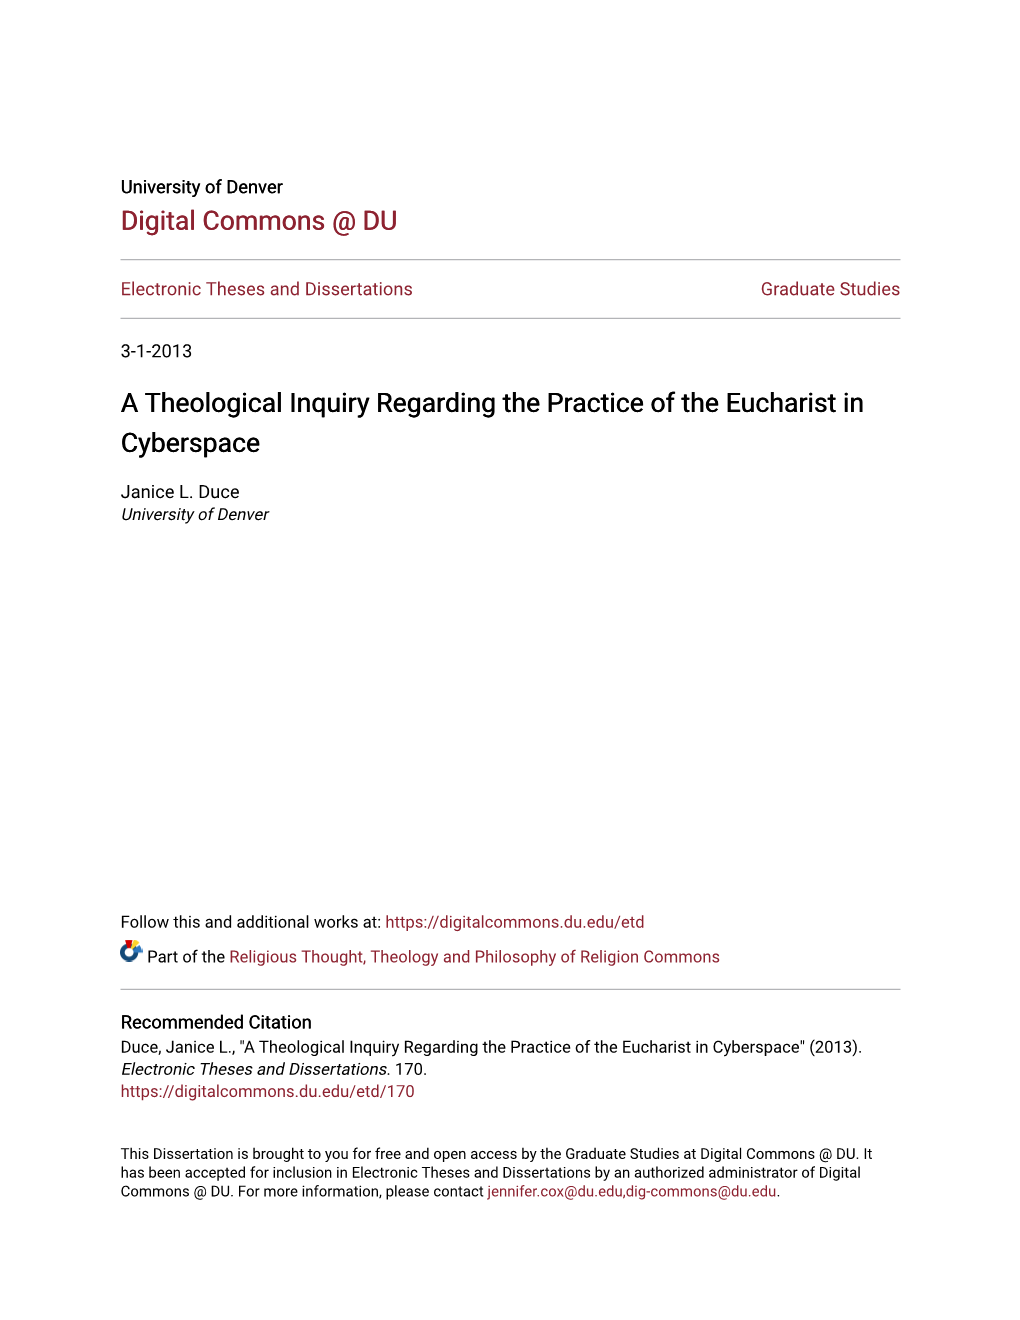 A Theological Inquiry Regarding the Practice of the Eucharist in Cyberspace